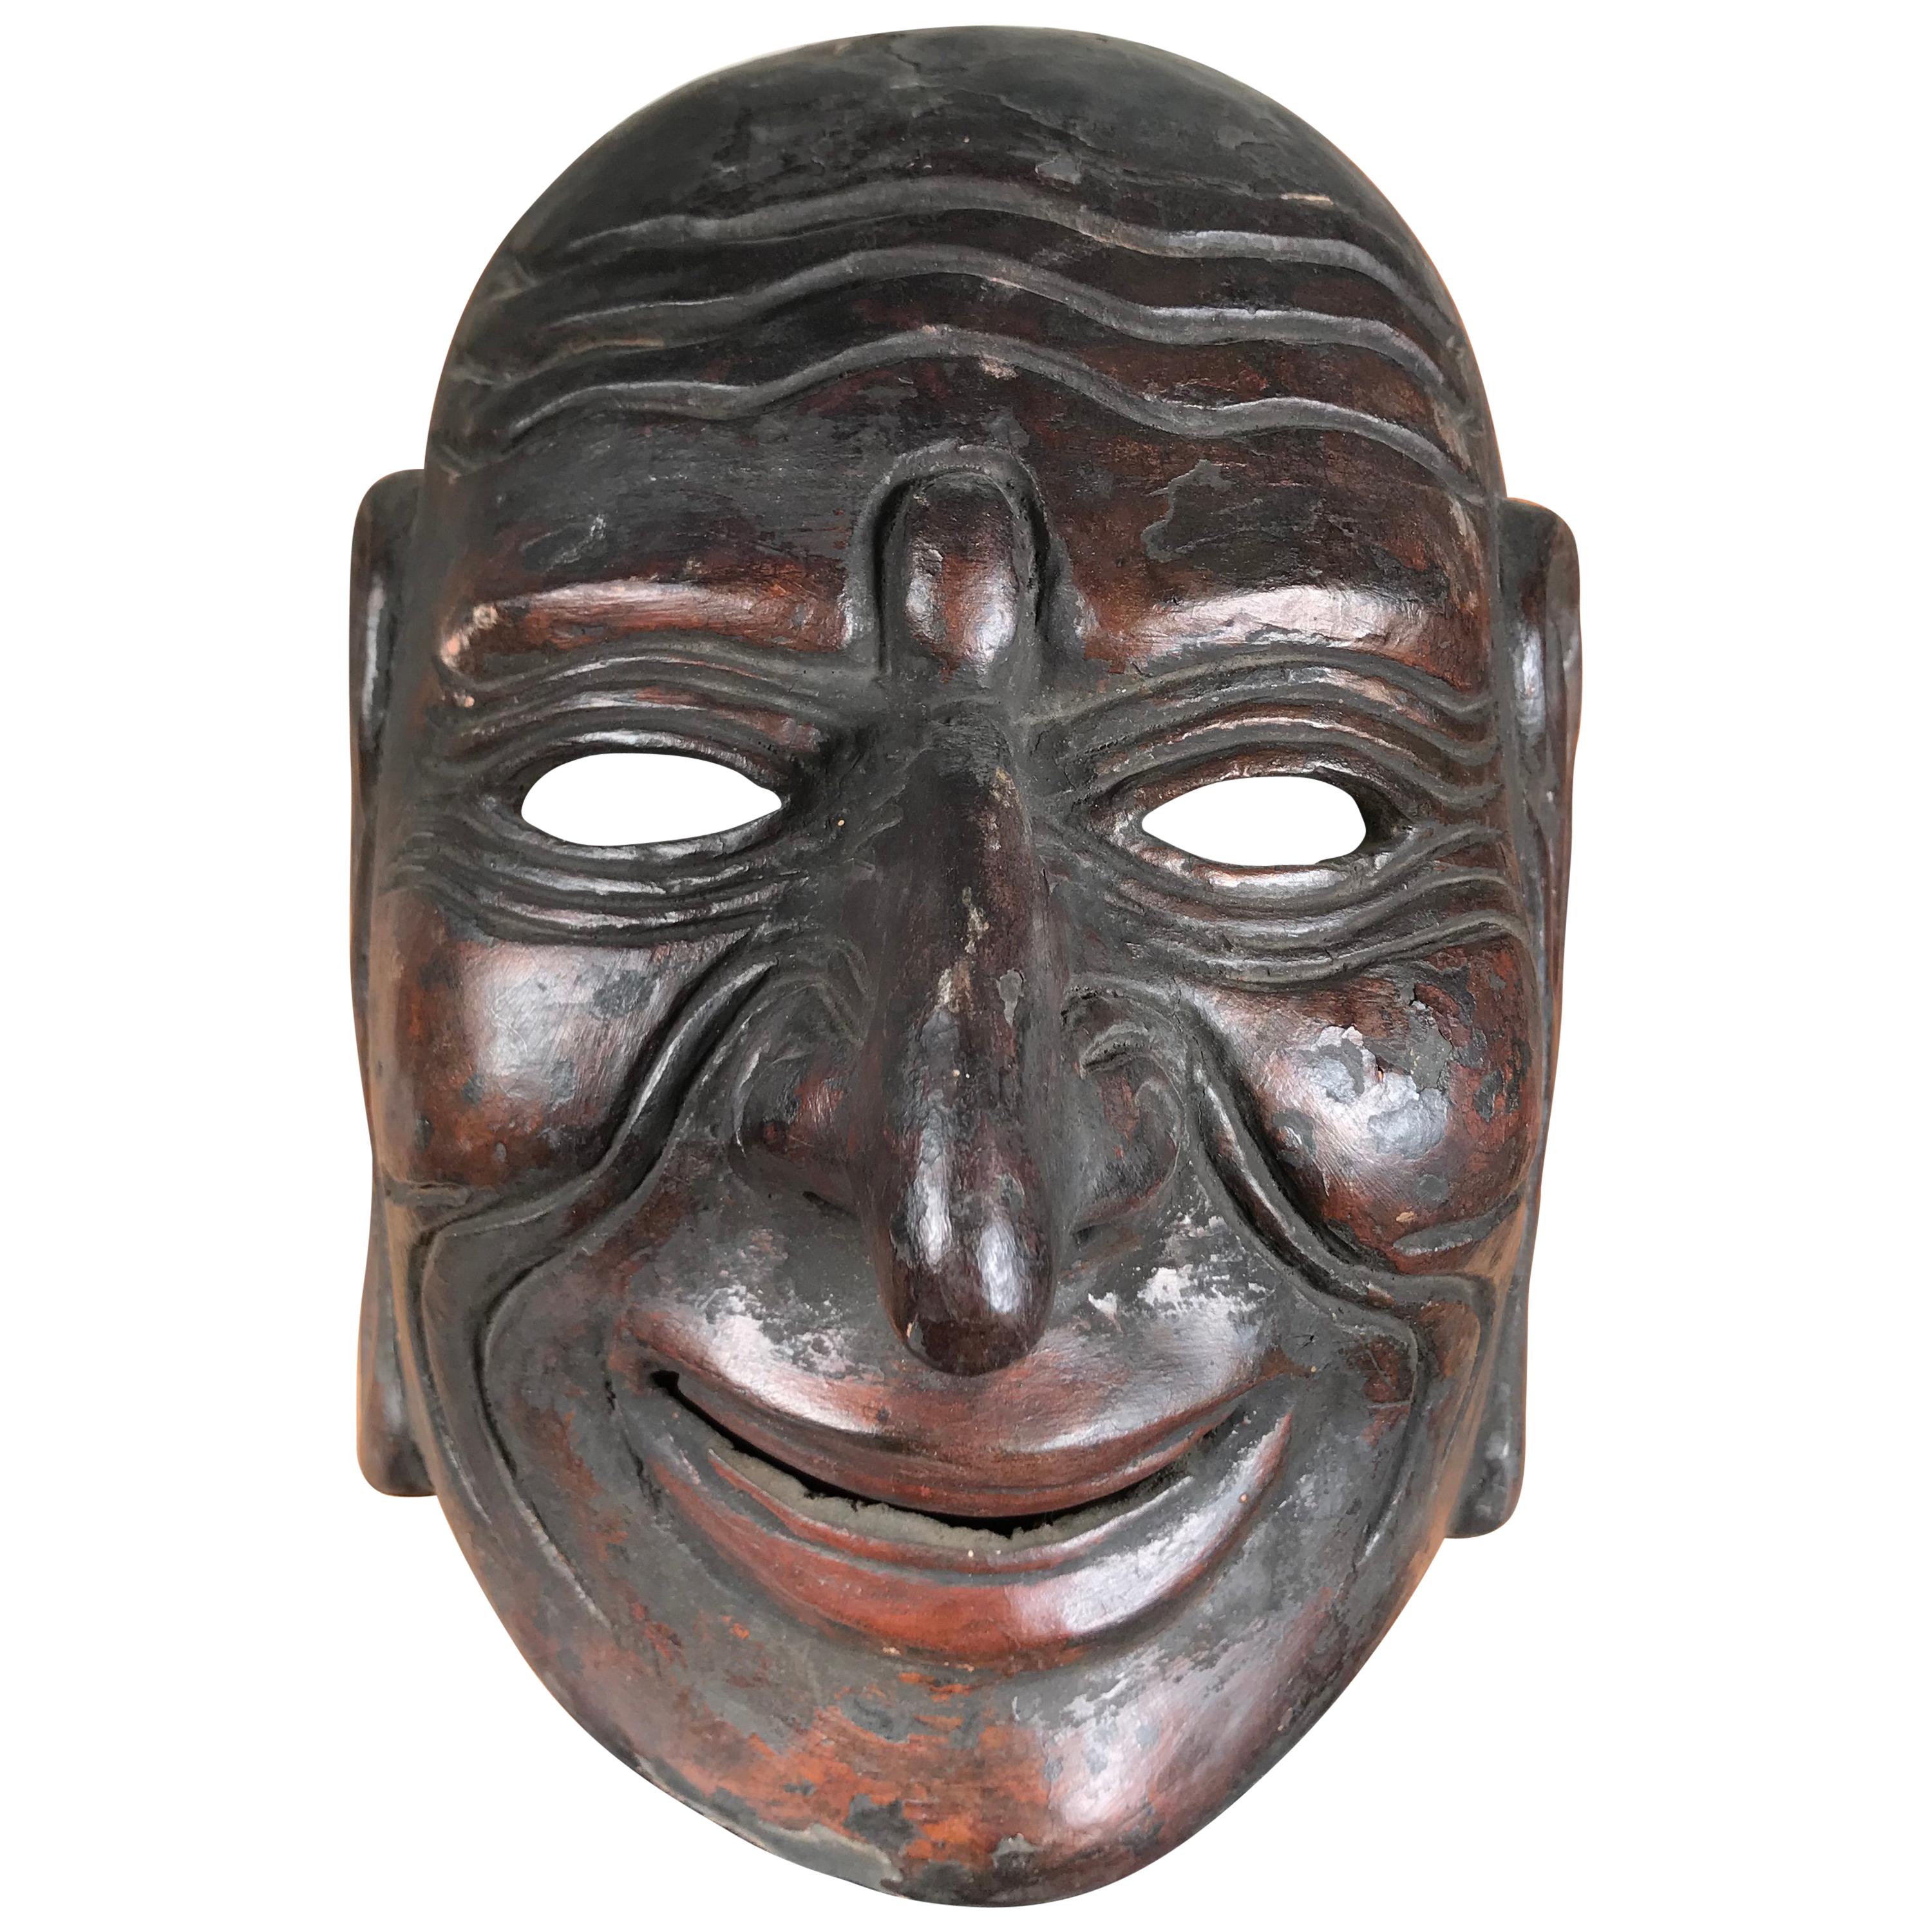 From our recent Japanese acquisitions travels.

This finely carved Japanese antique wooden theater mask is a superb example of this character with its dramatic brow and pleasant joyful ear to ear smile. This mask and character may be seen in